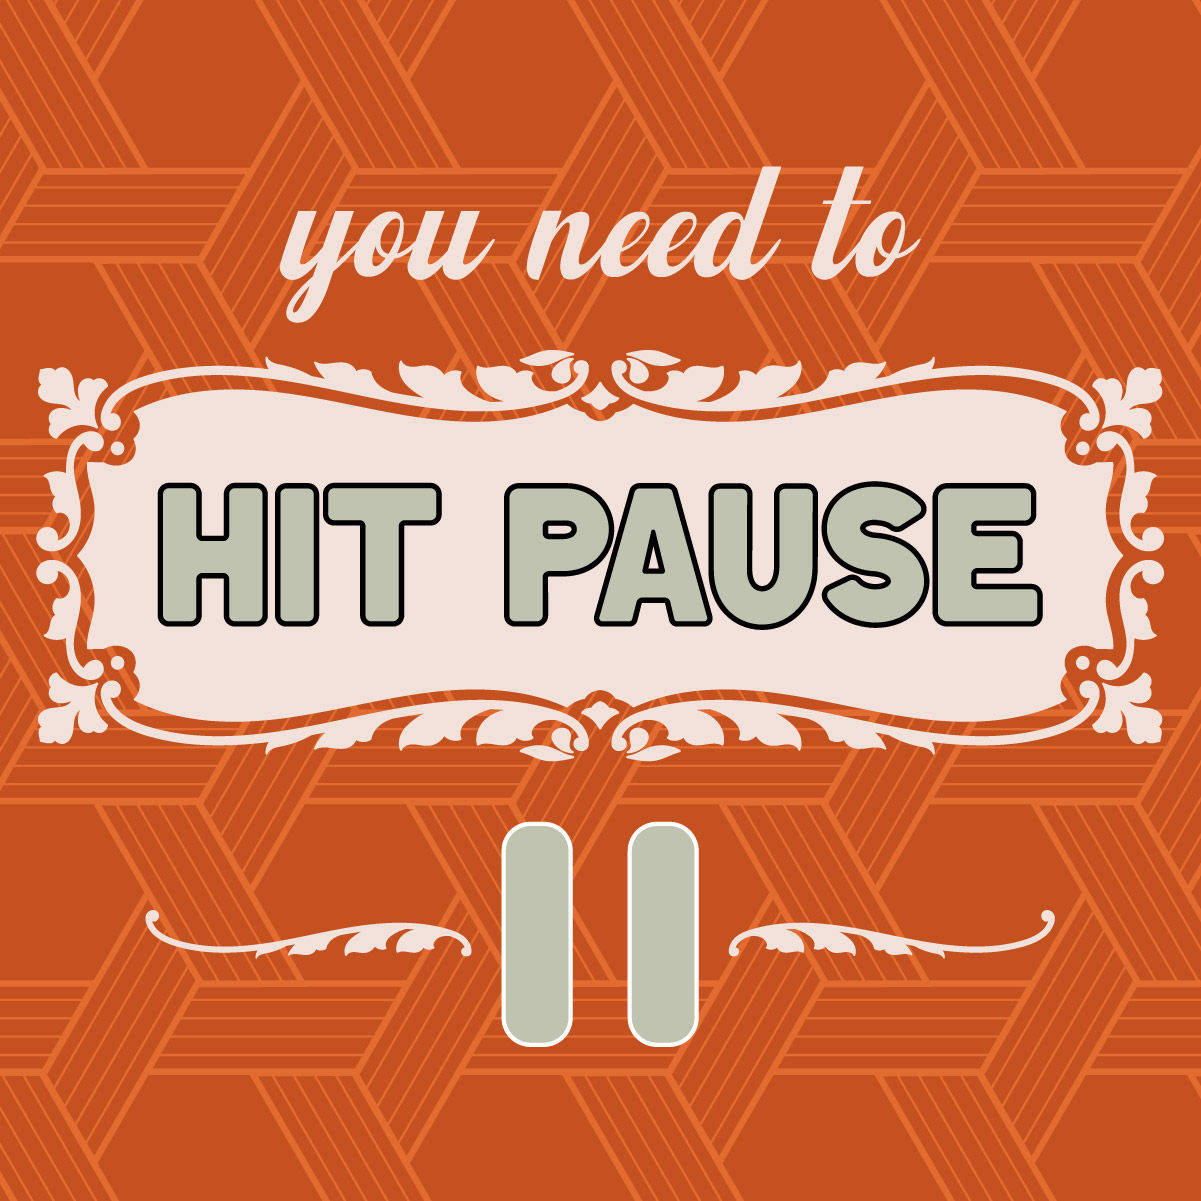 You need to hit pause